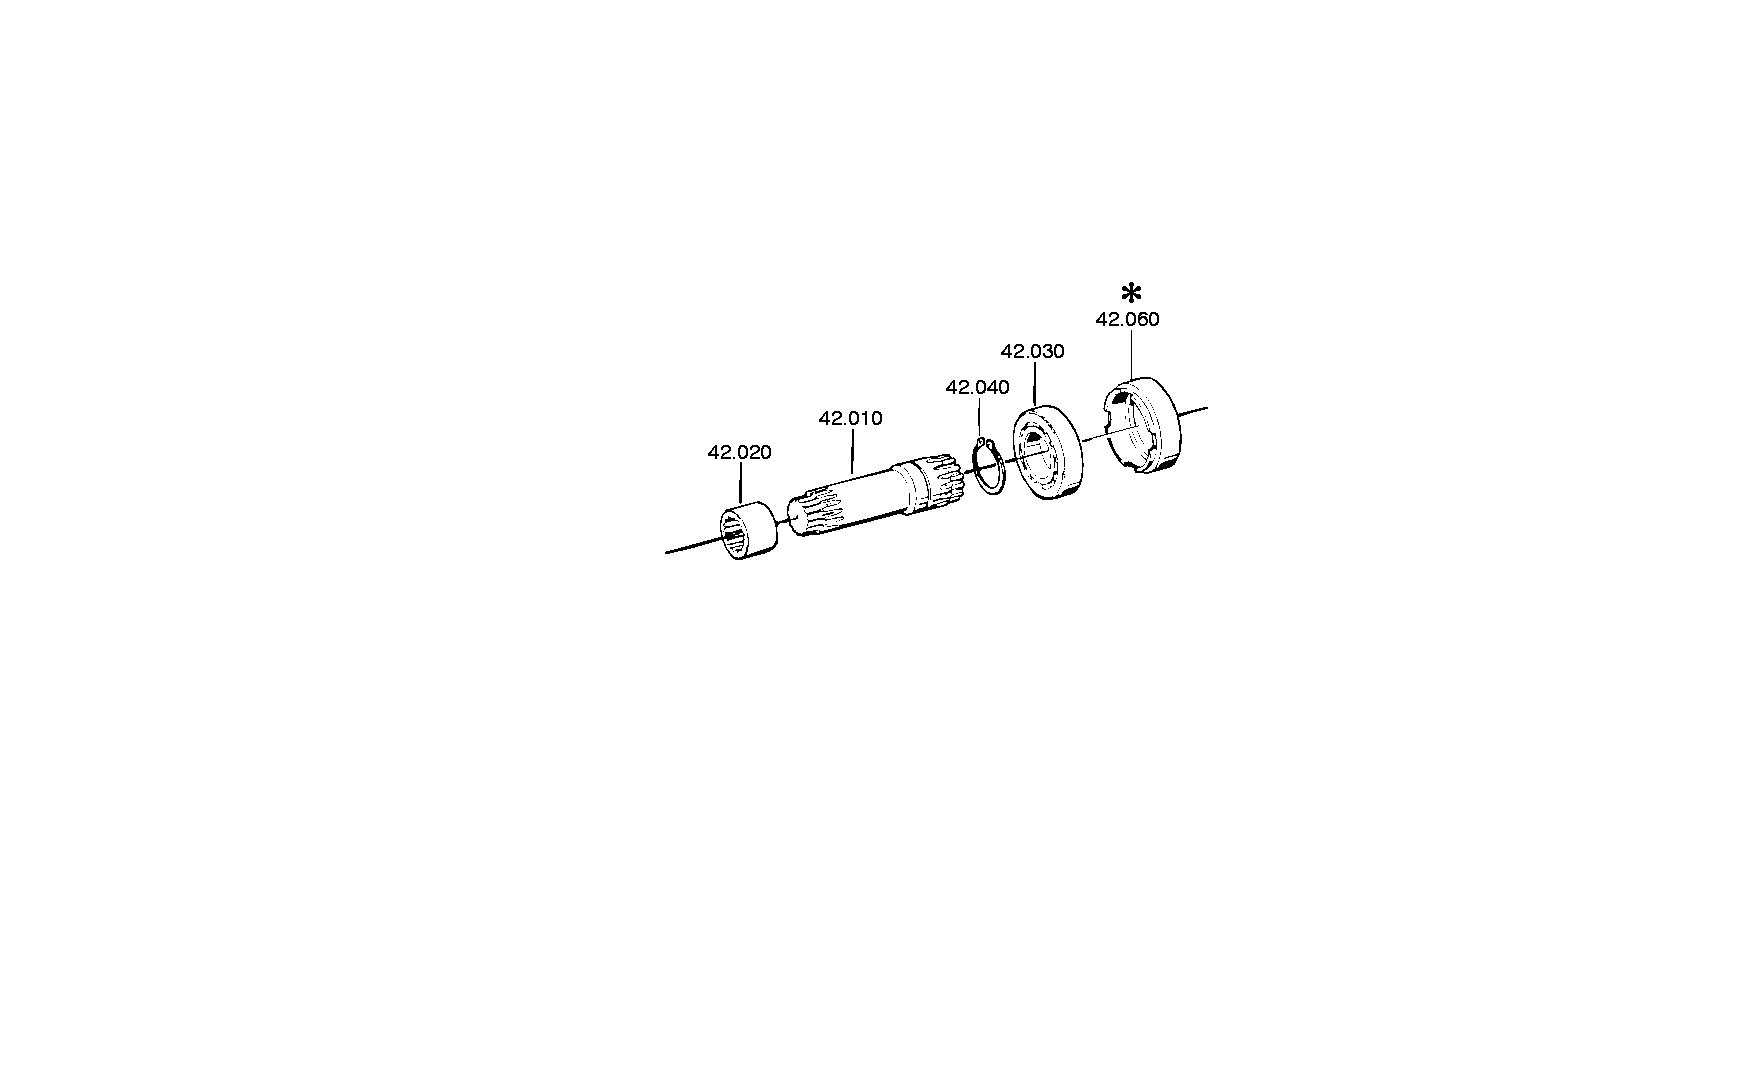 drawing for RENAULT TRUCKS 0000167404 - CONNECTING PARTS (figure 1)